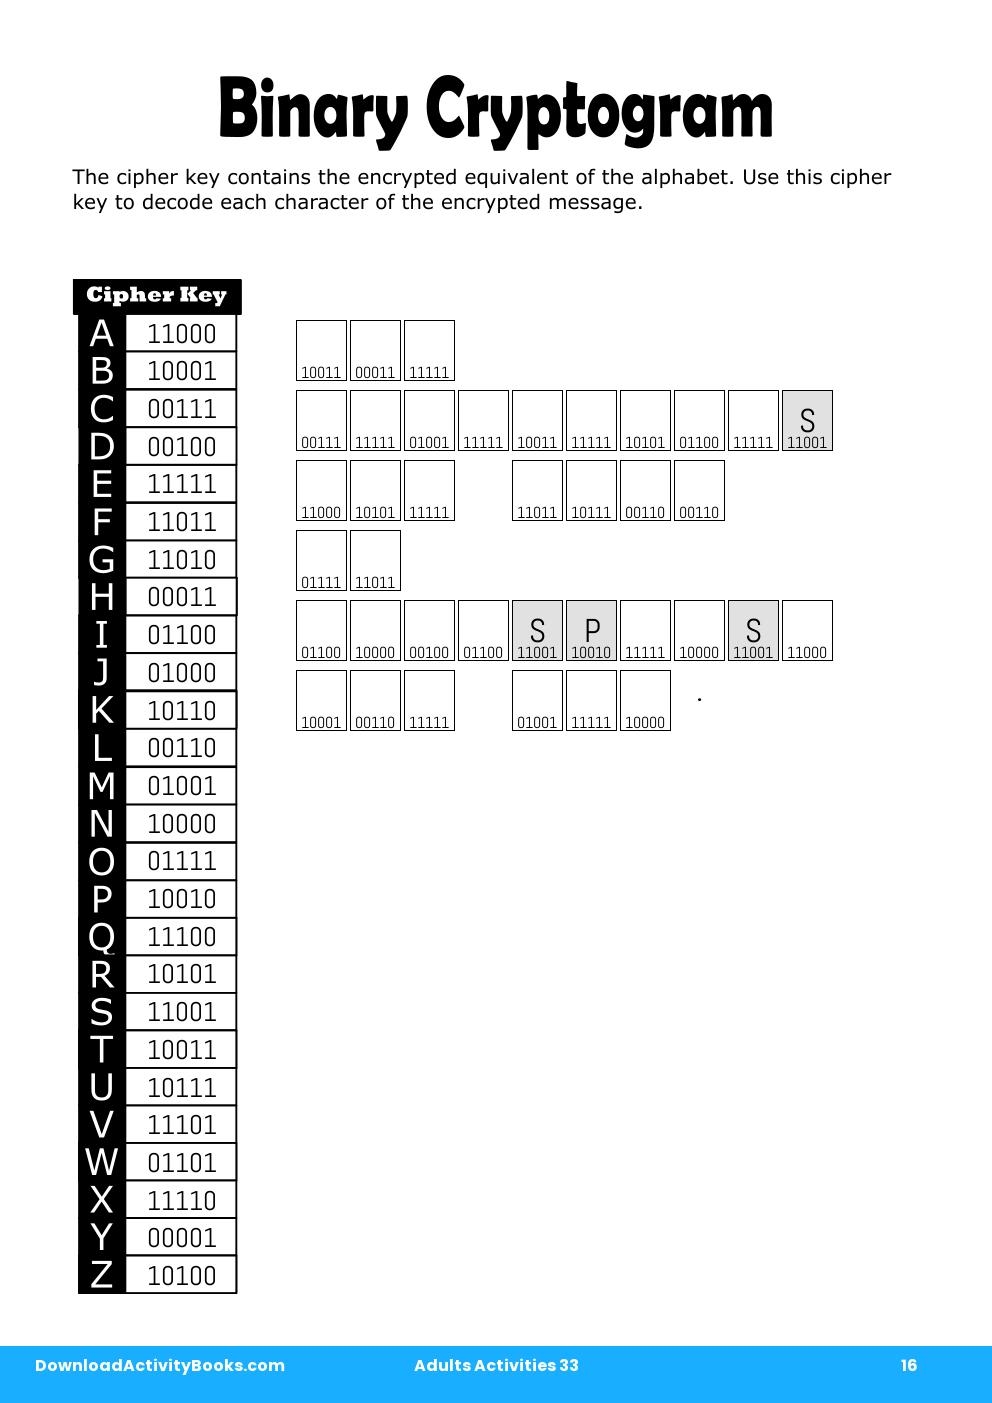 Binary Cryptogram in Adults Activities 33